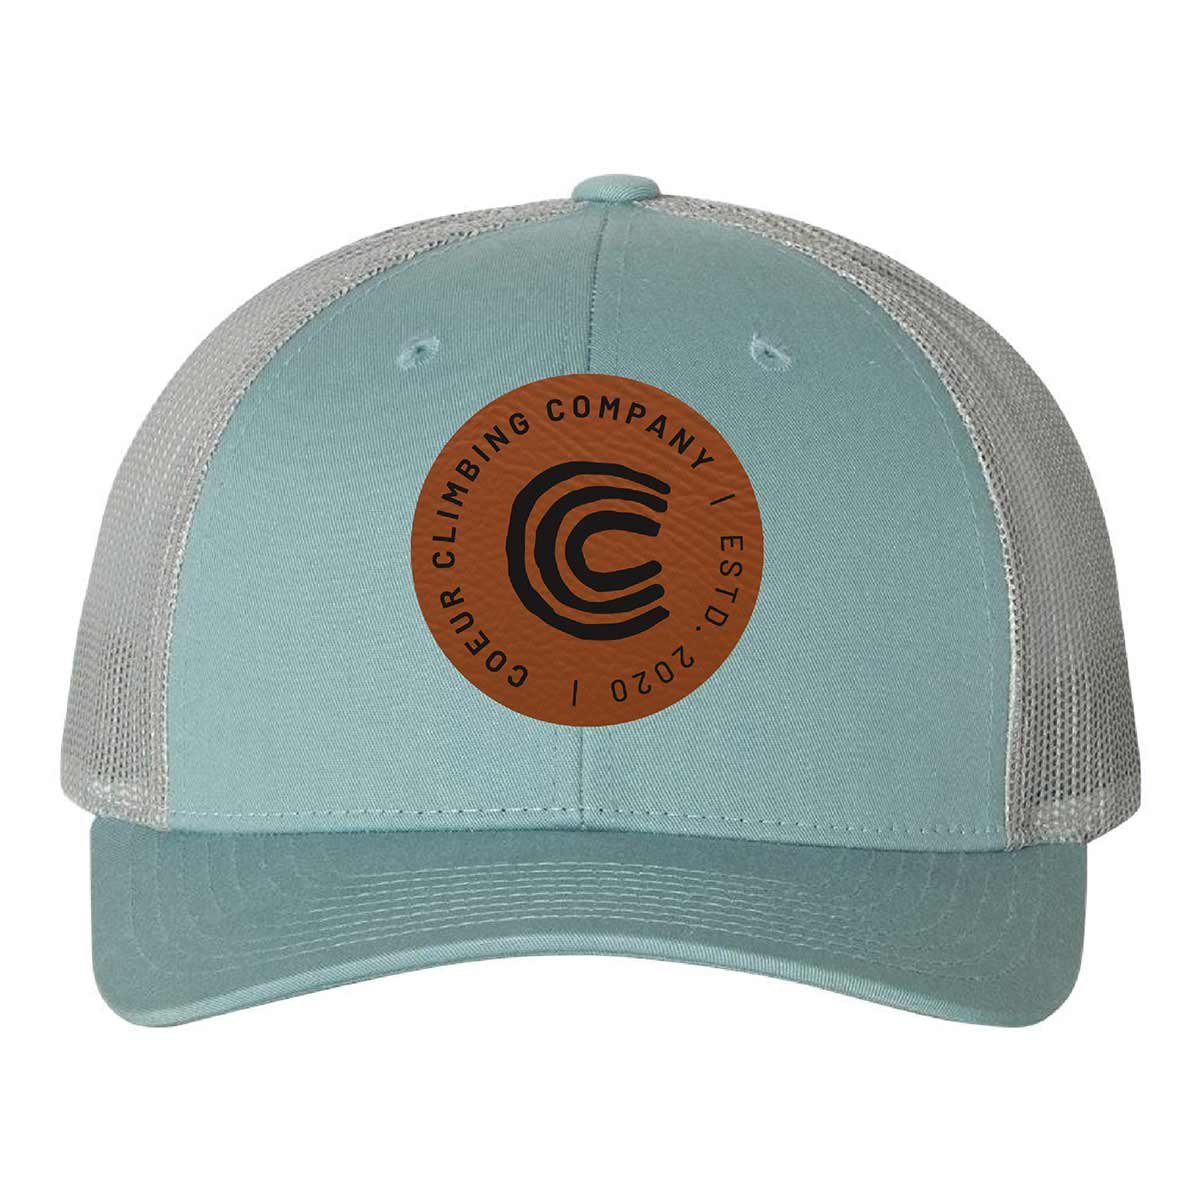 coeur climbing low profile hat with leatherette patch